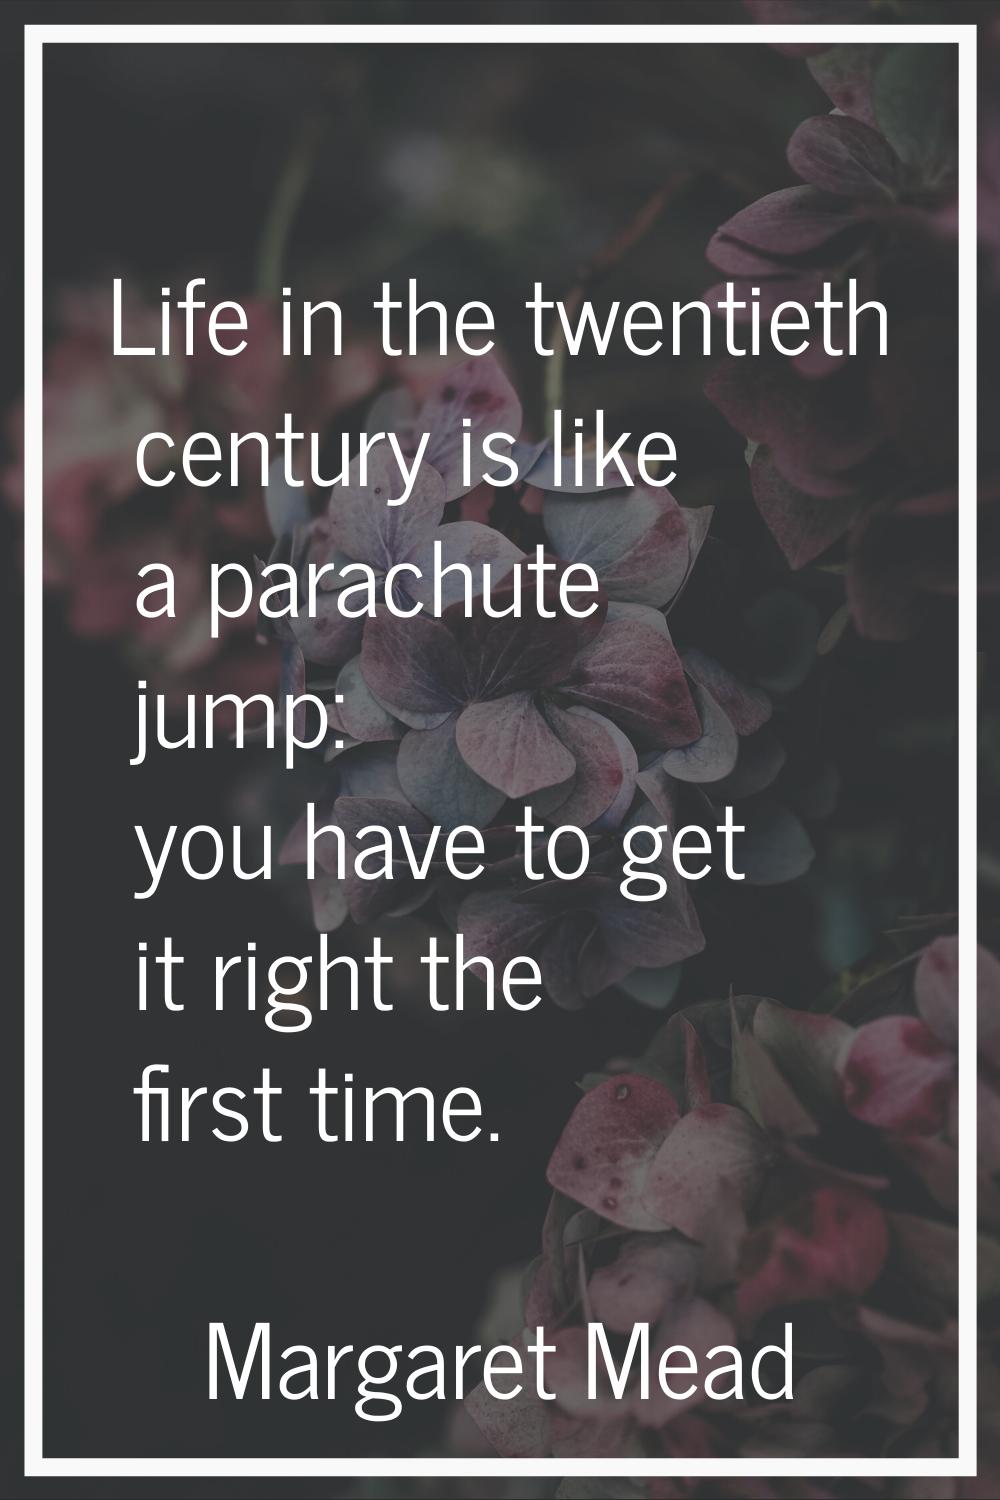 Life in the twentieth century is like a parachute jump: you have to get it right the first time.